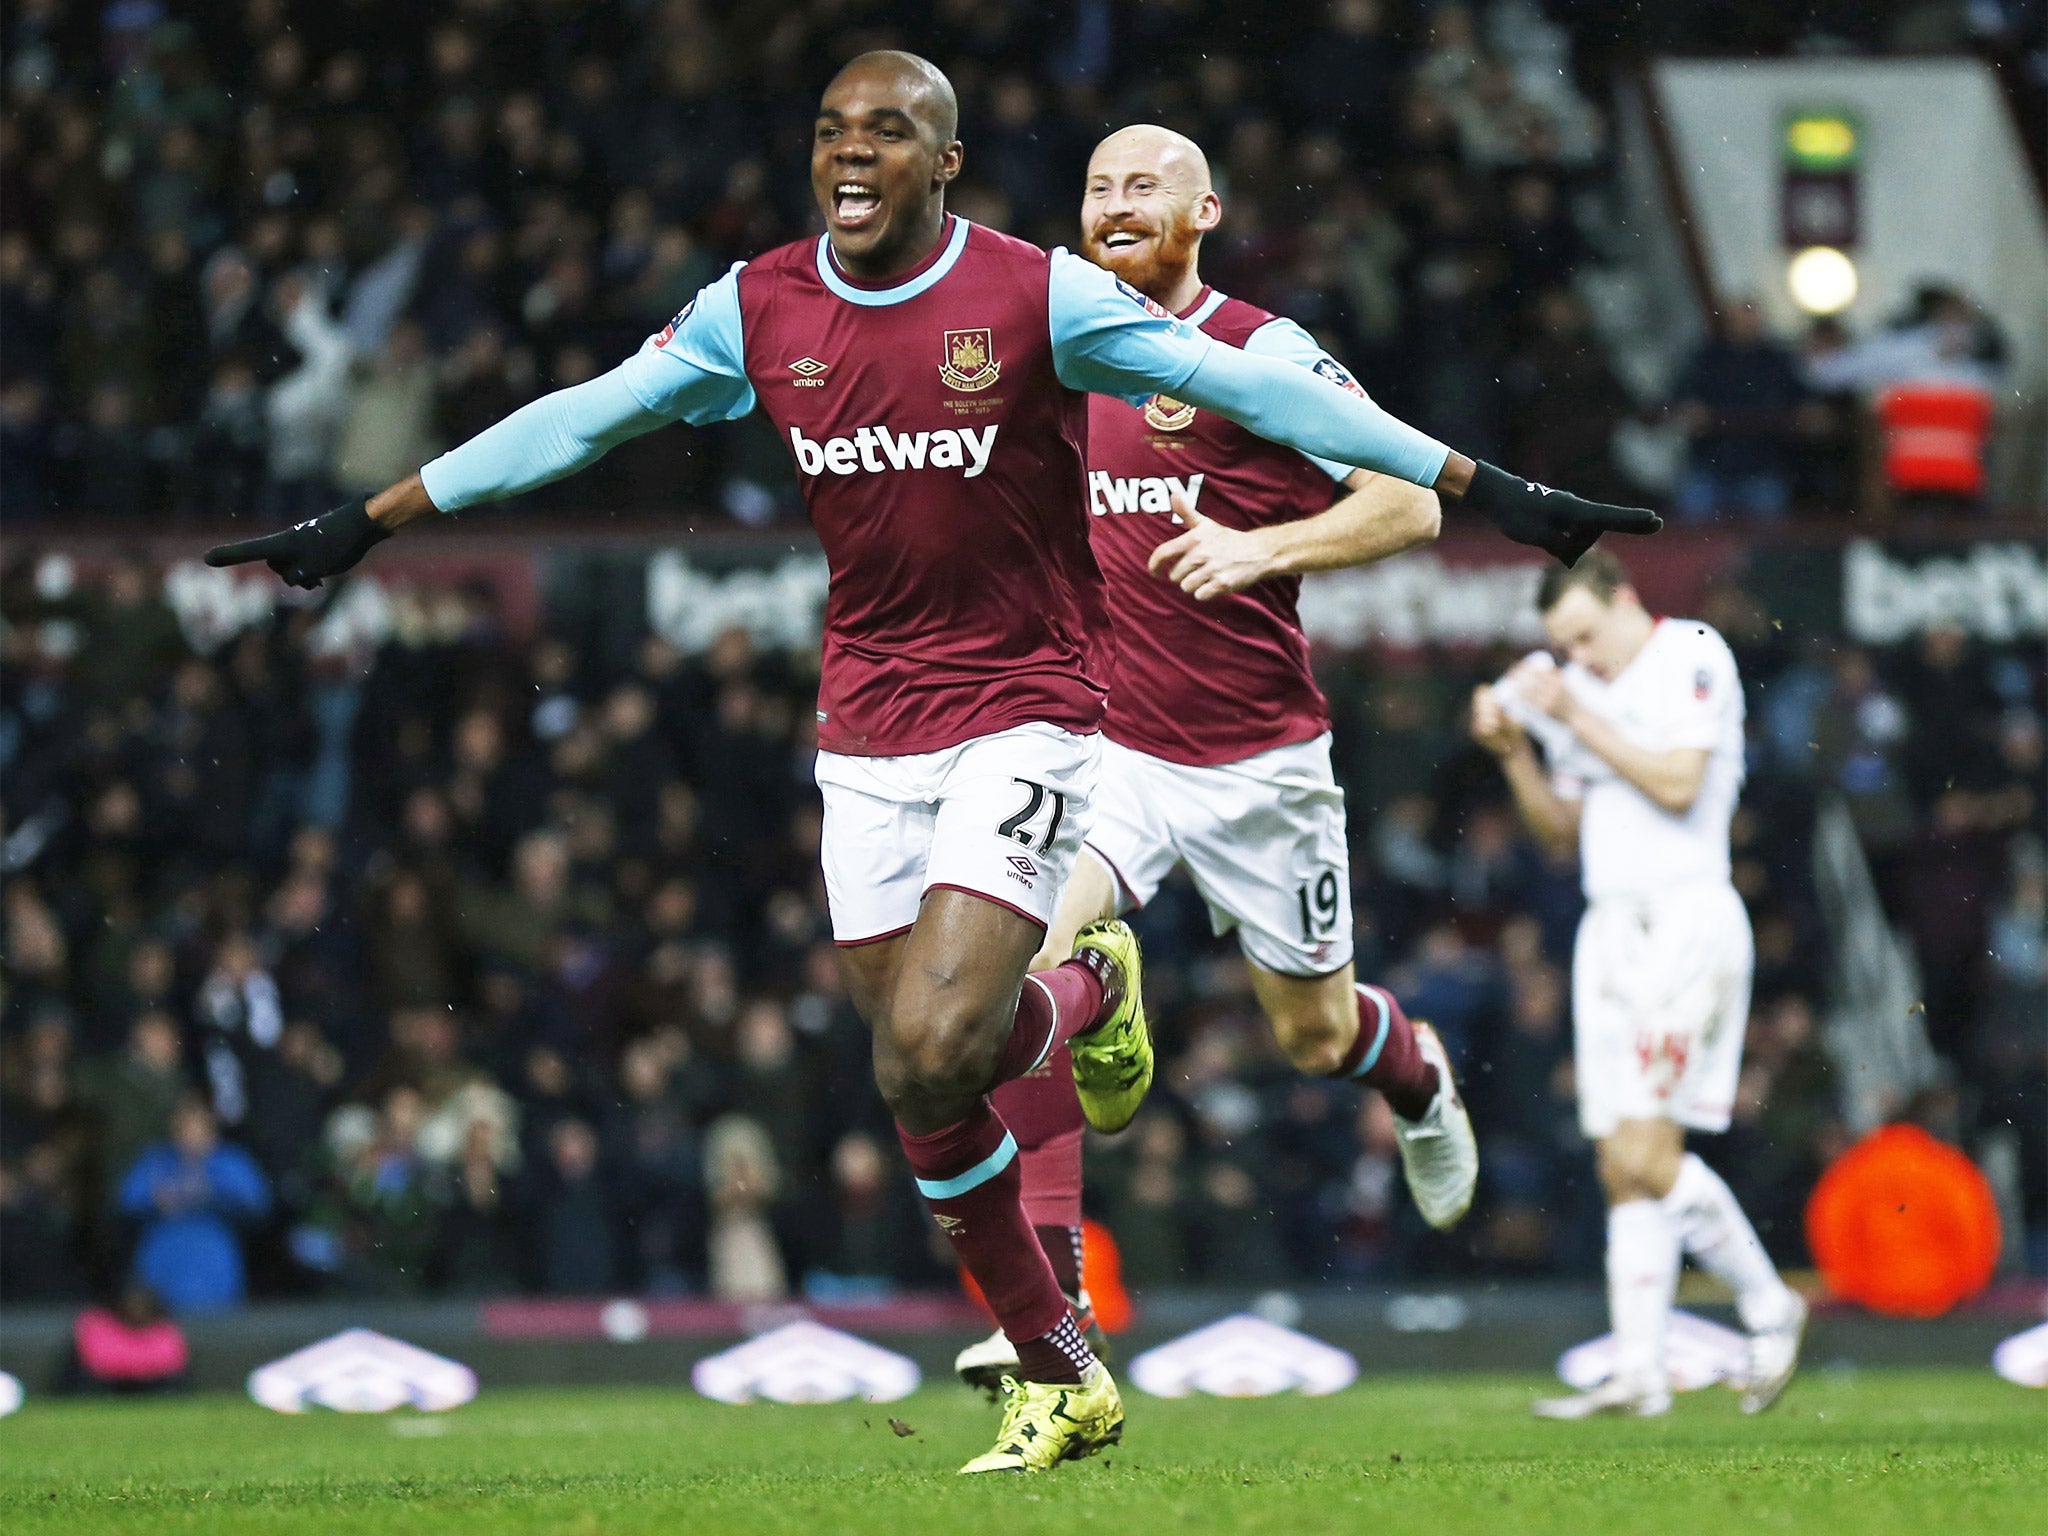 Angelo Ogbonna celebrates scoring West Ham’s dramatic extra time goal in the 2-1 FA Cup win over Liverpool at Upton Park